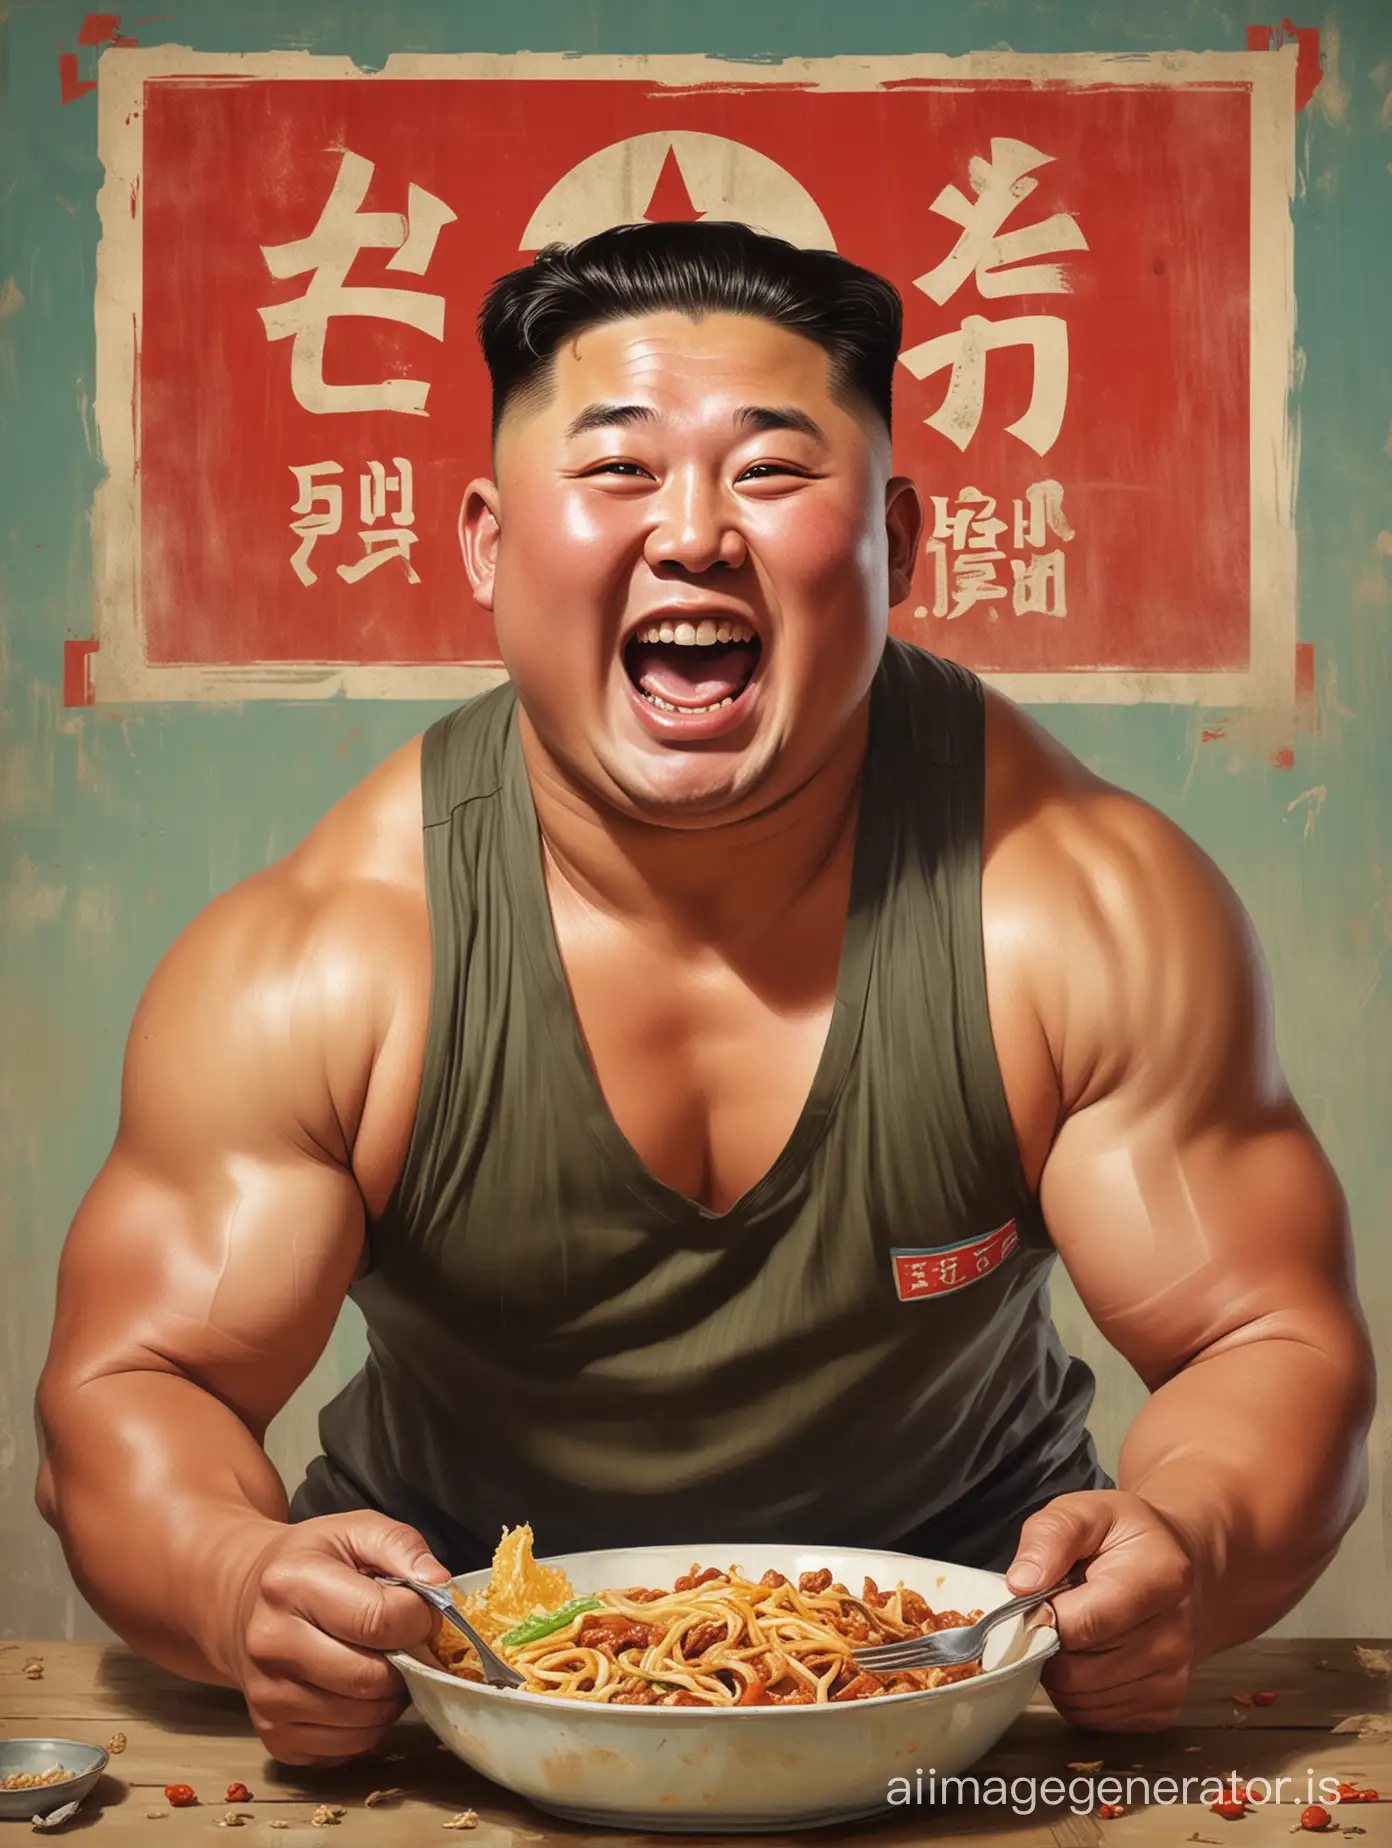 portrait of kim jong un as a powerlifting bodybuilder, eating food and laughing at starving people, in the style of a vintage propaganda poster